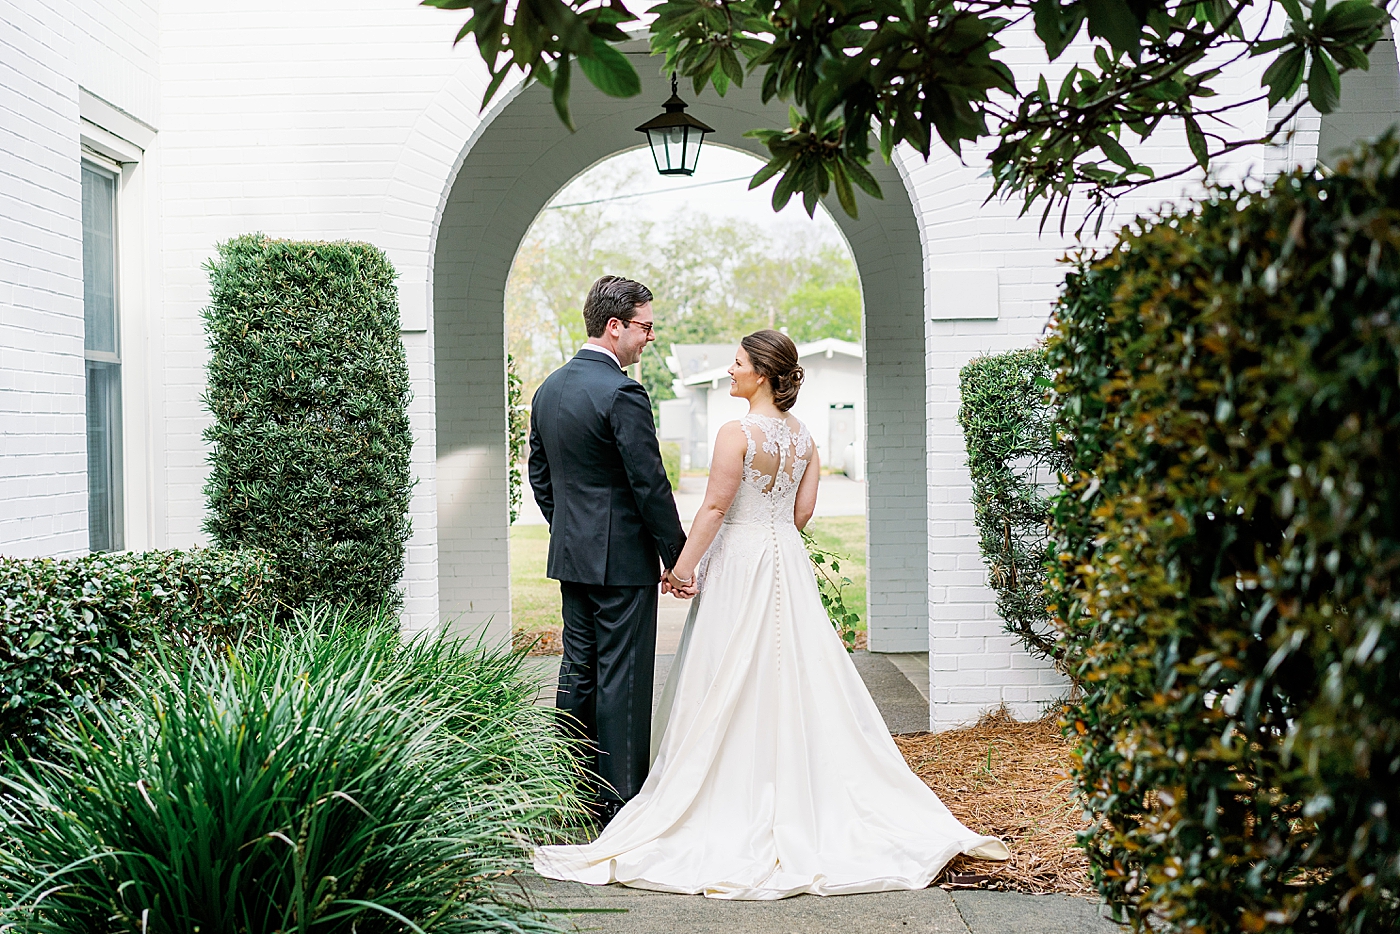 Bride and groom holding hands under and archway | Photo by Annie Laura Photography